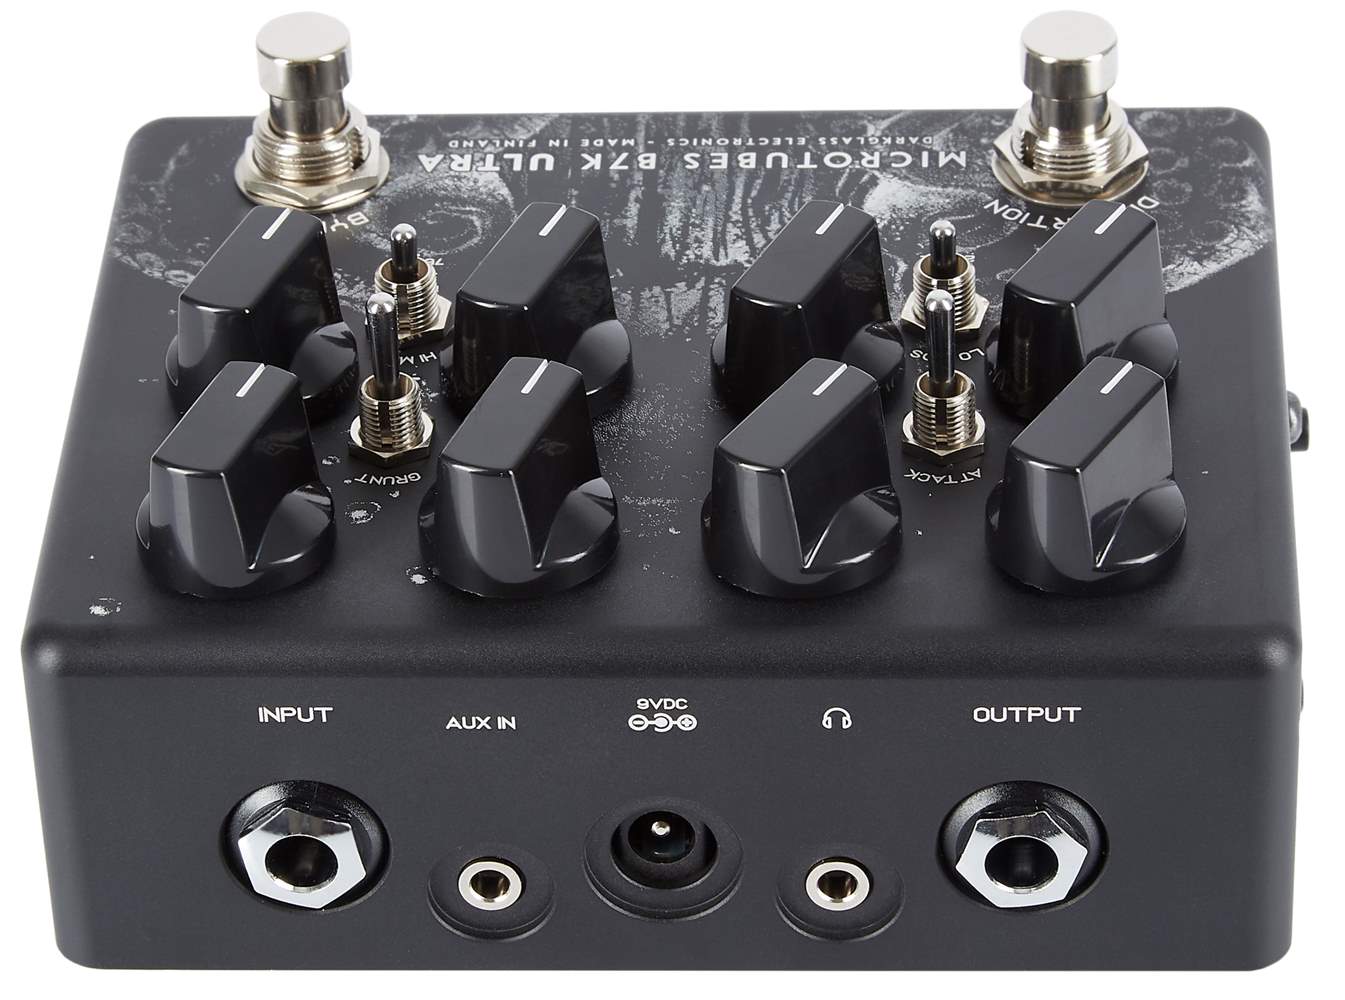 DARKGLASS Microtubes B7K Ultra v2 (AUX-IN) “The Squid” Limited 